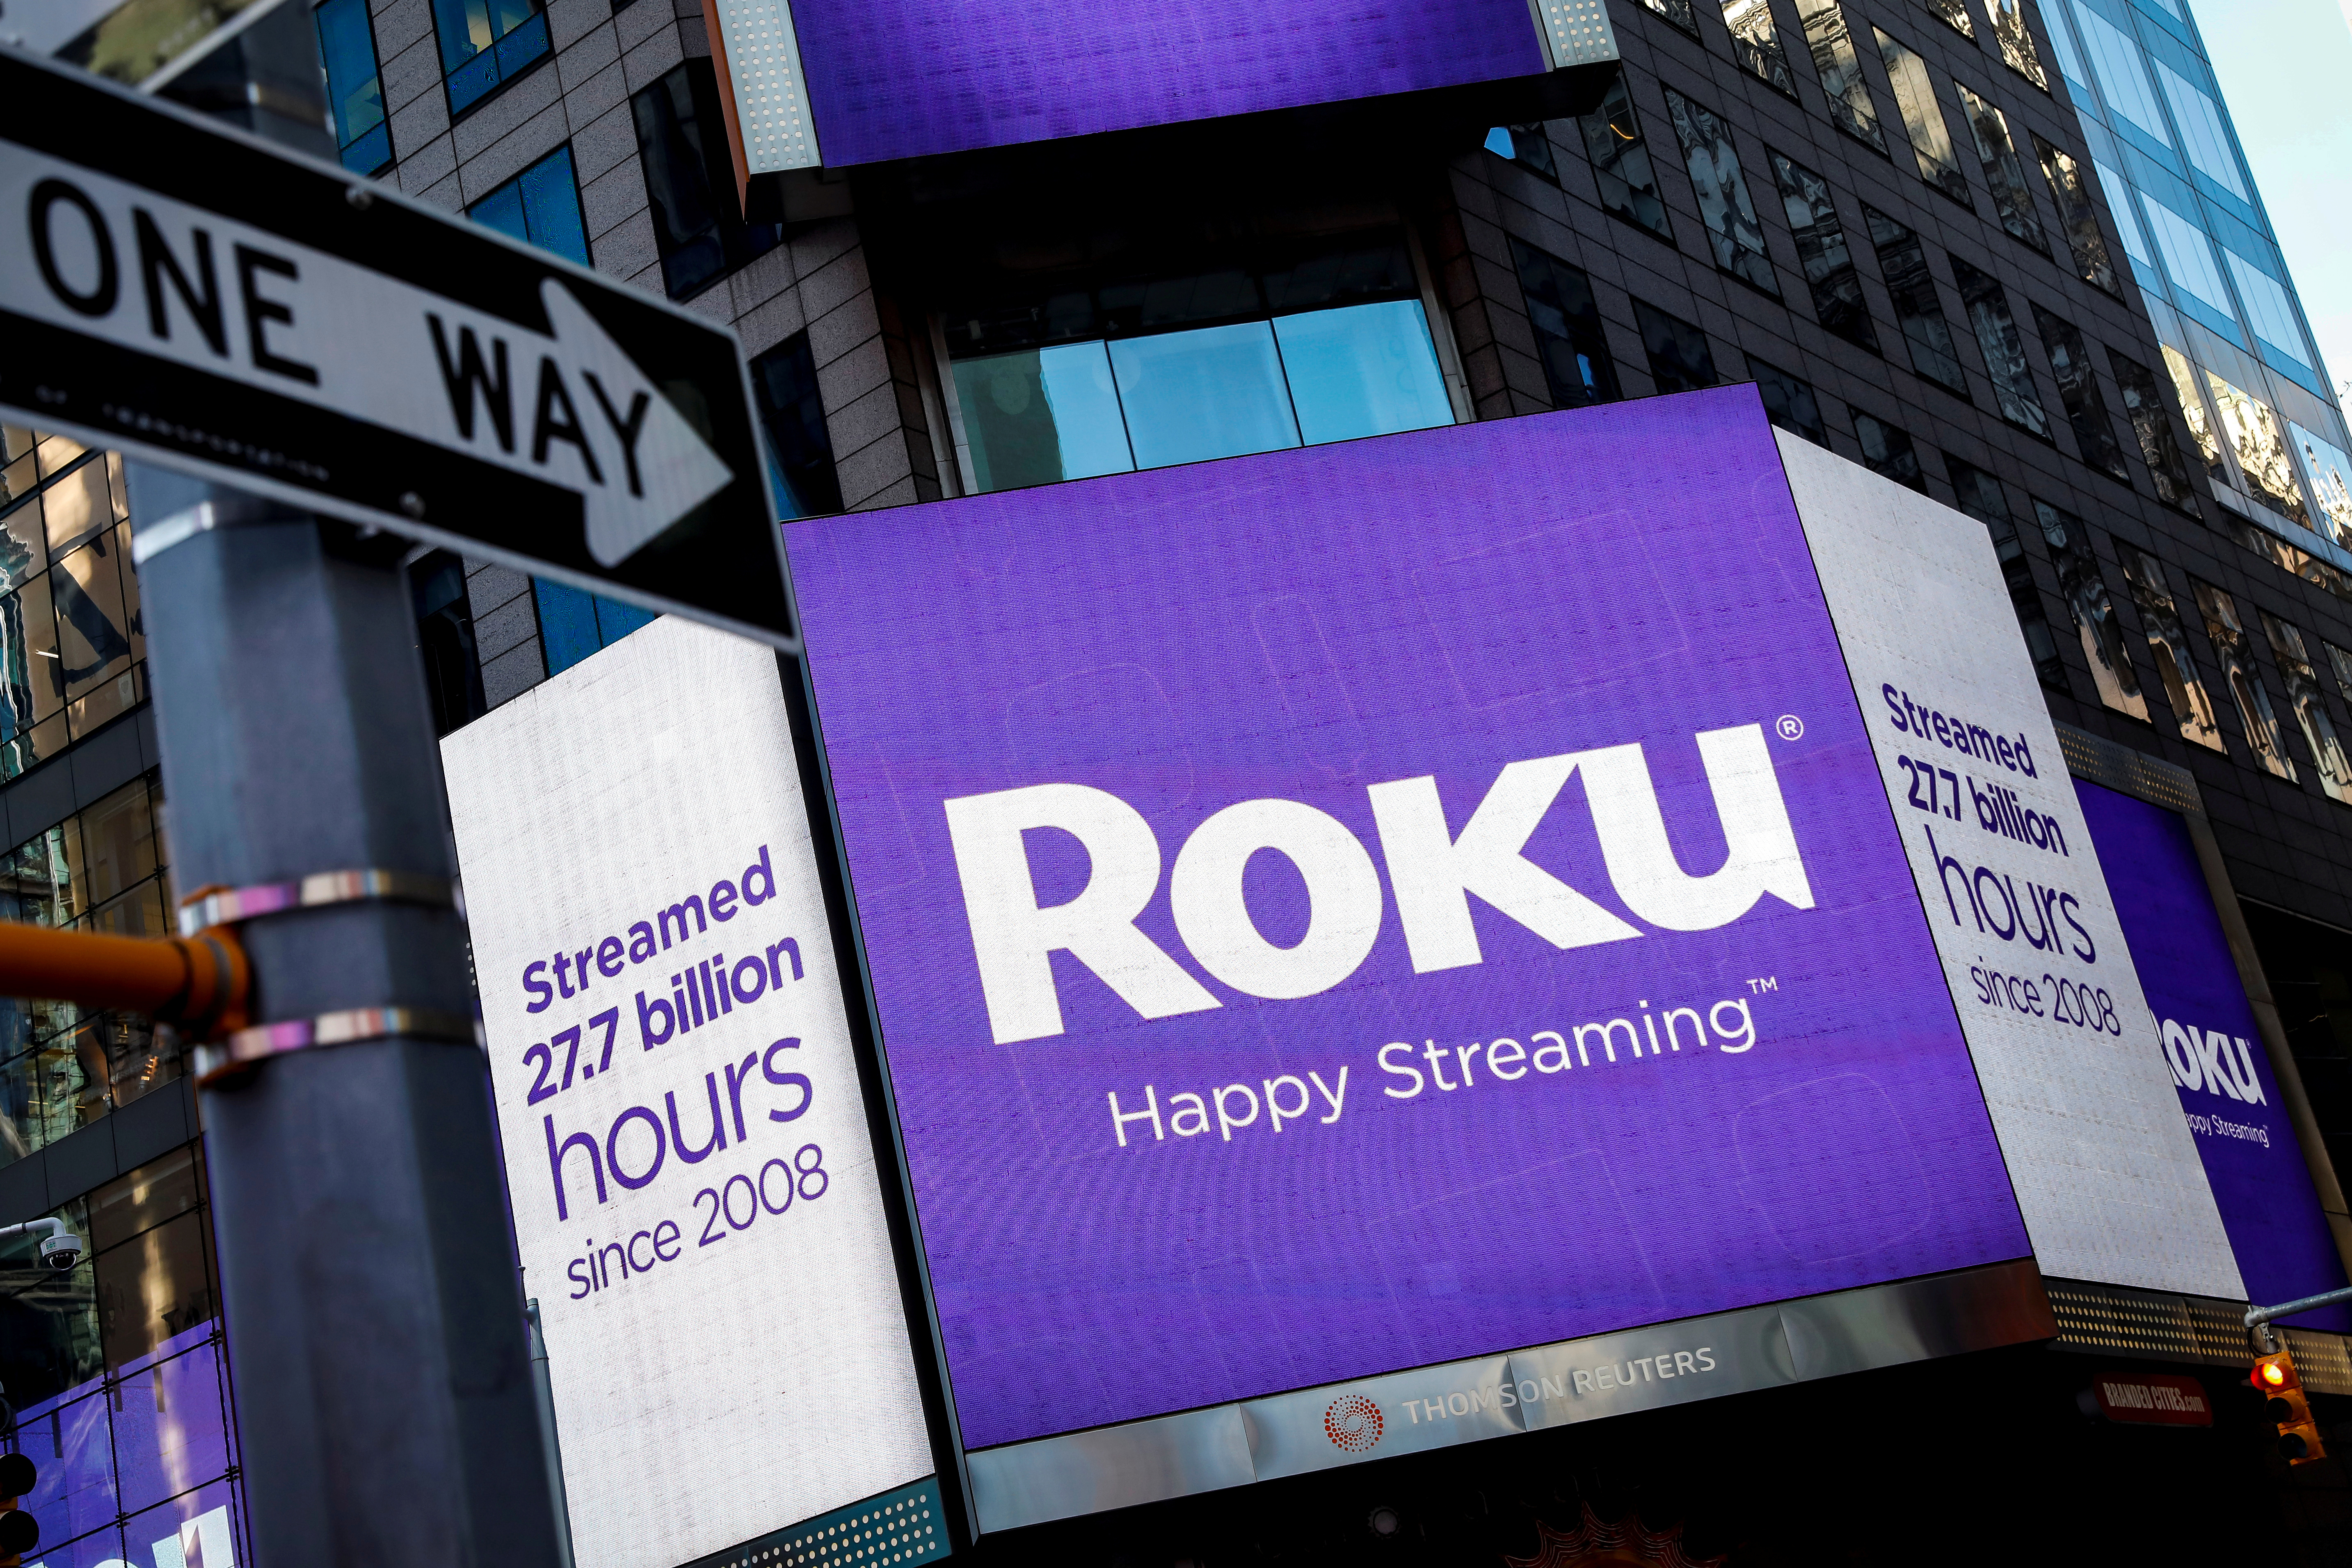 FILE PHOTO A video sign displays the logo for Roku Inc, a Fox-backed video streaming firm, in Times Square after the company's IPO at the Nasdaq Market in New York